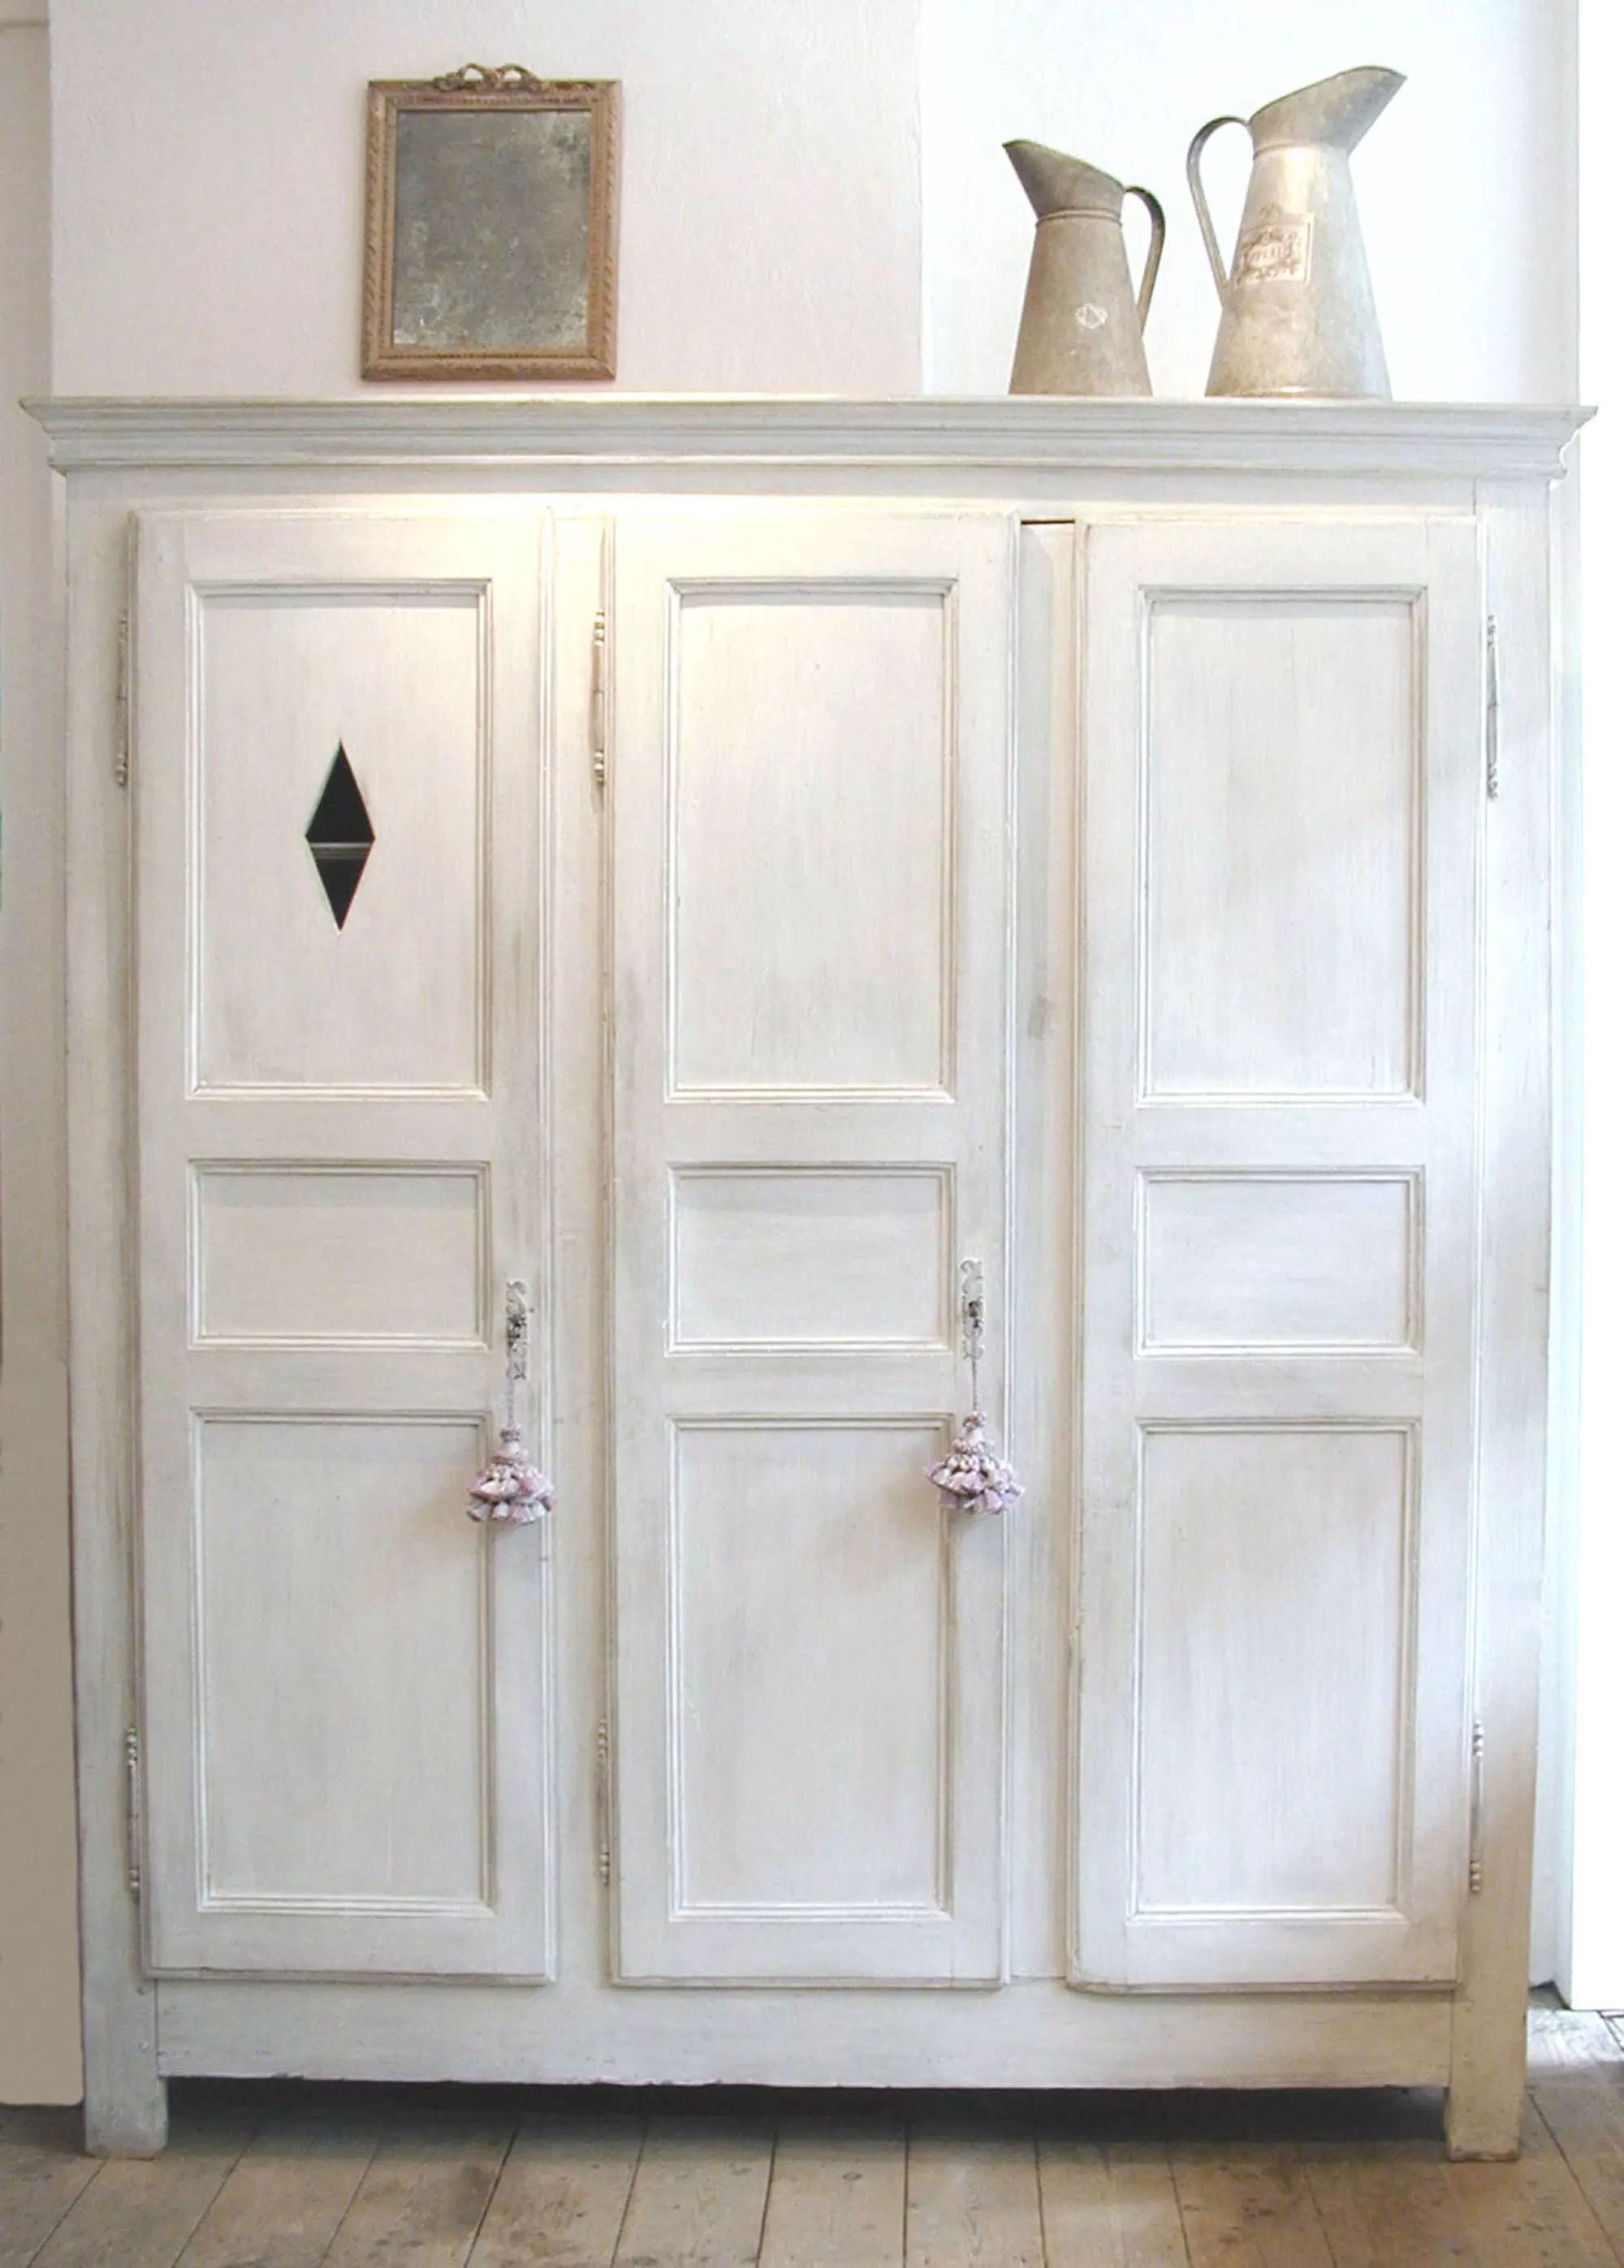 French 18th Century White 3 Door Armoire In Antique Wardrobes & Armoires Throughout 3 Door French Wardrobes (View 11 of 20)